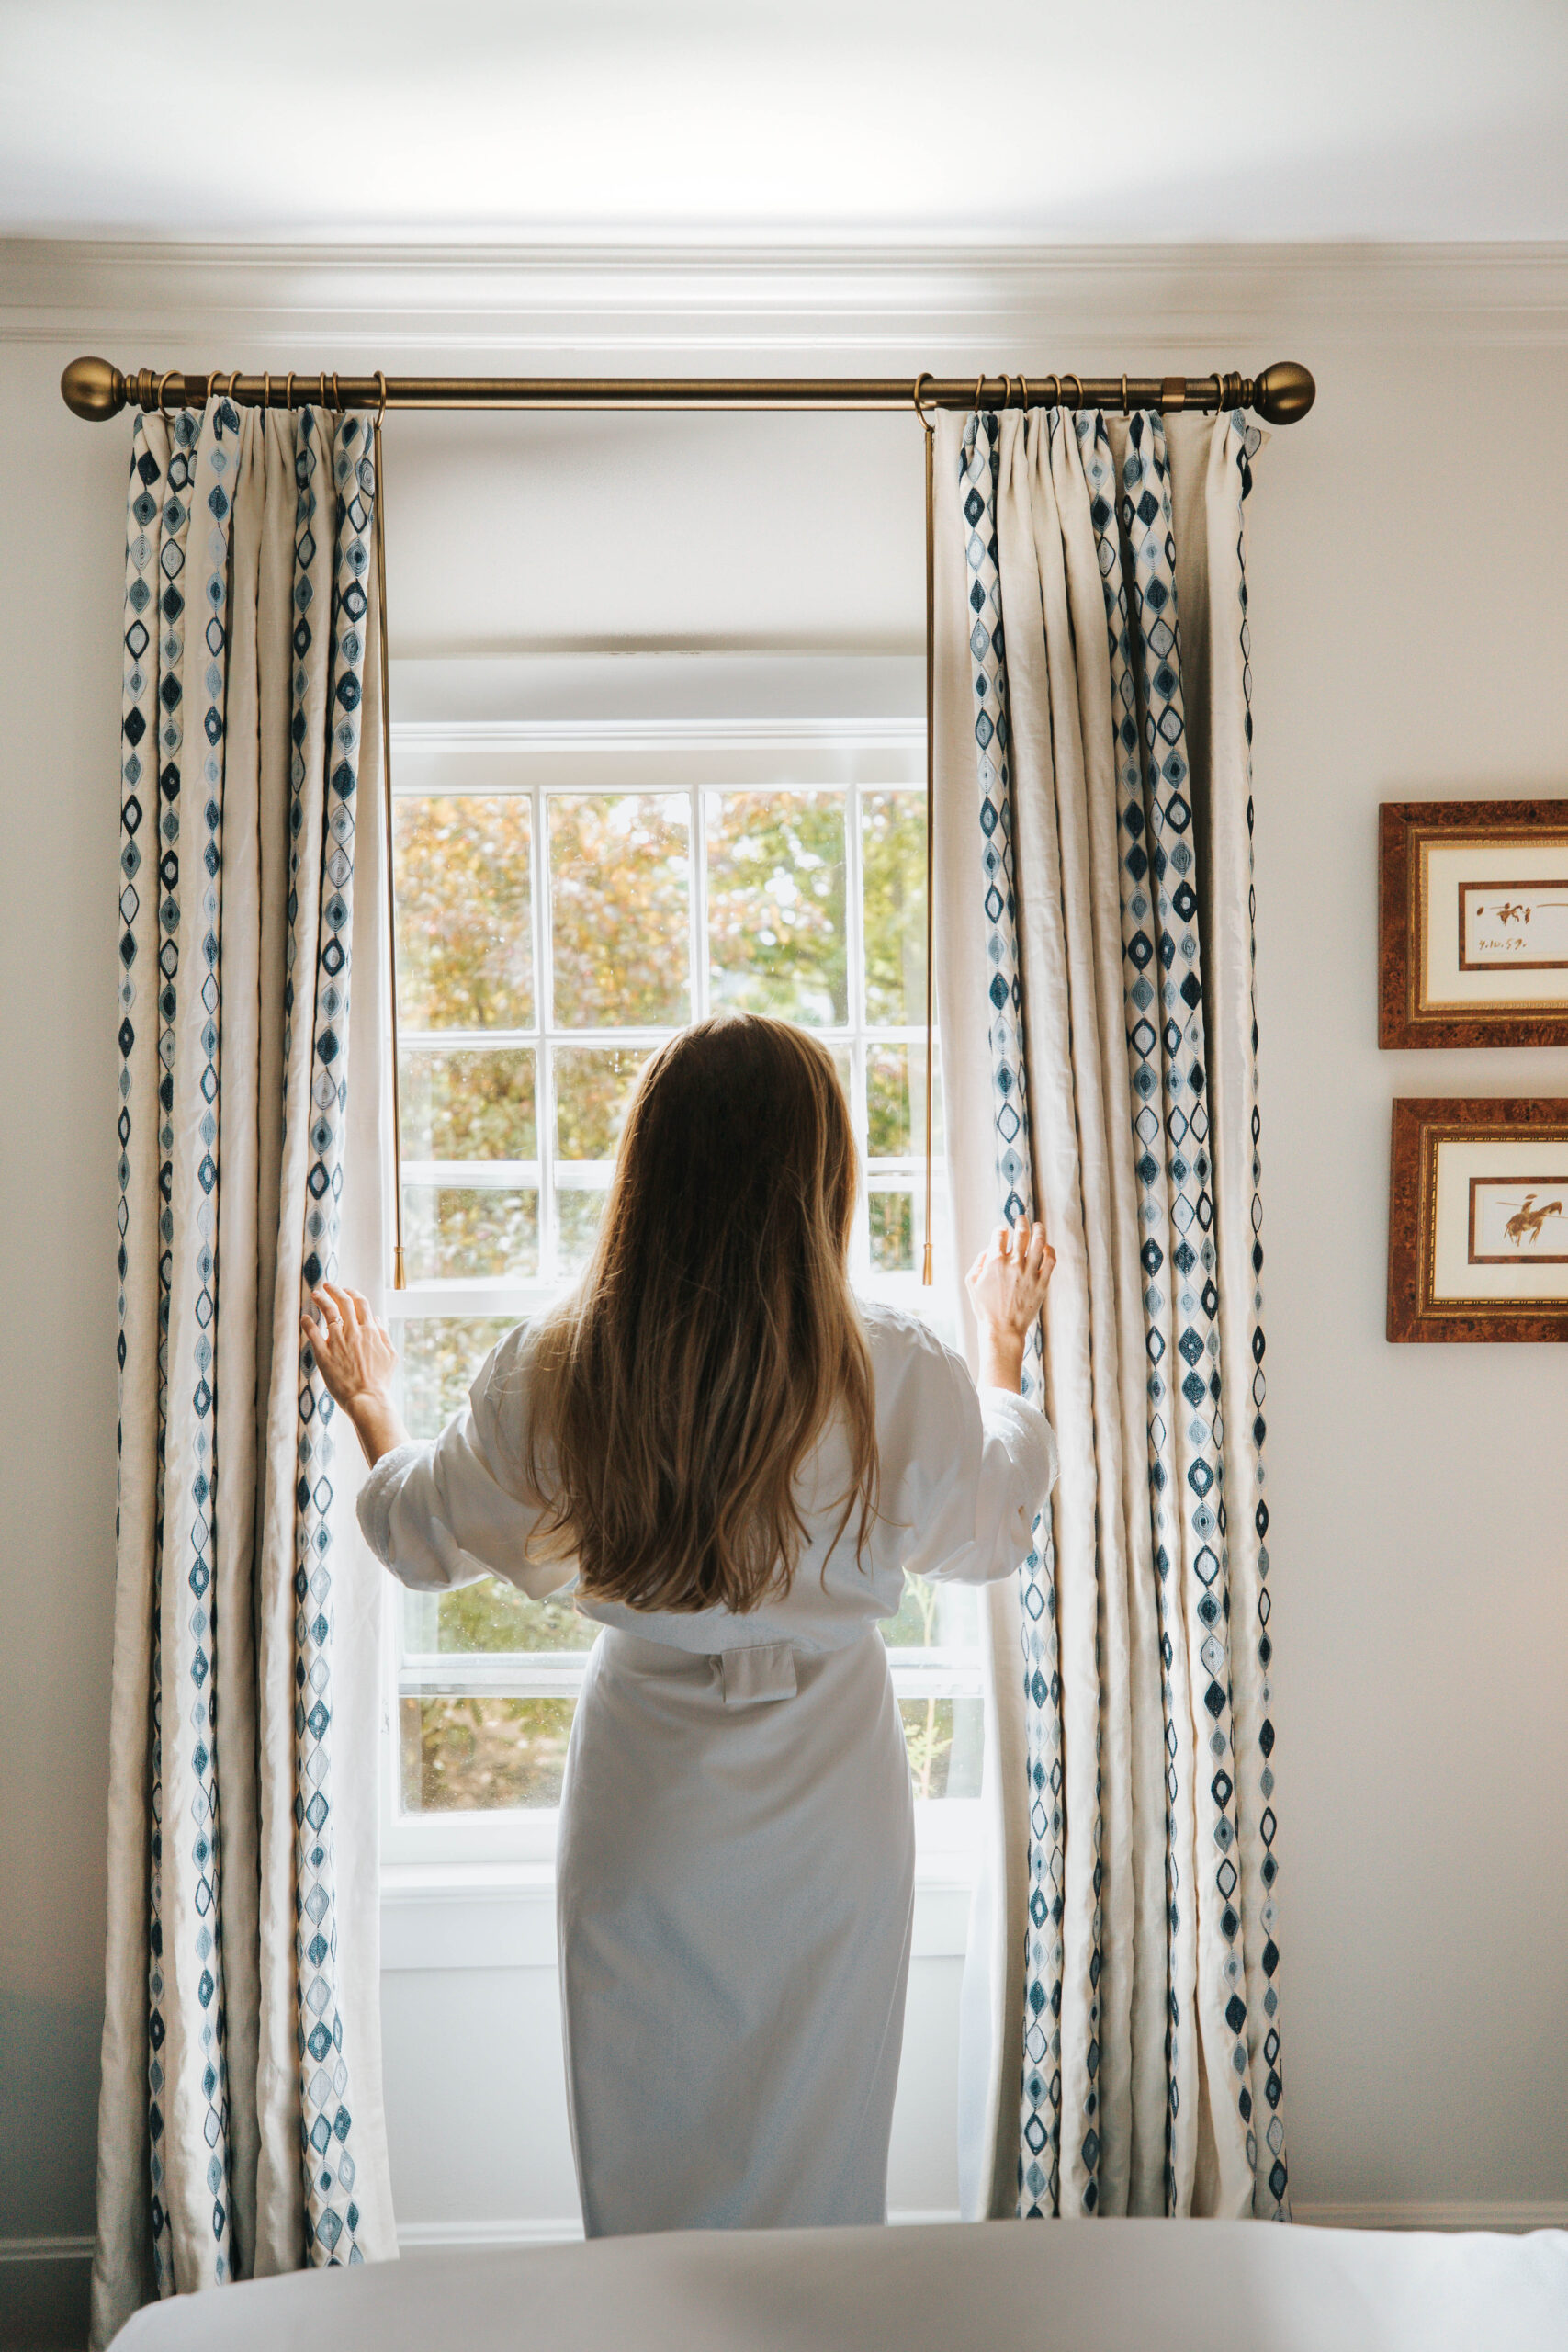 A woman in a robe draws the curtains to look outside a window.